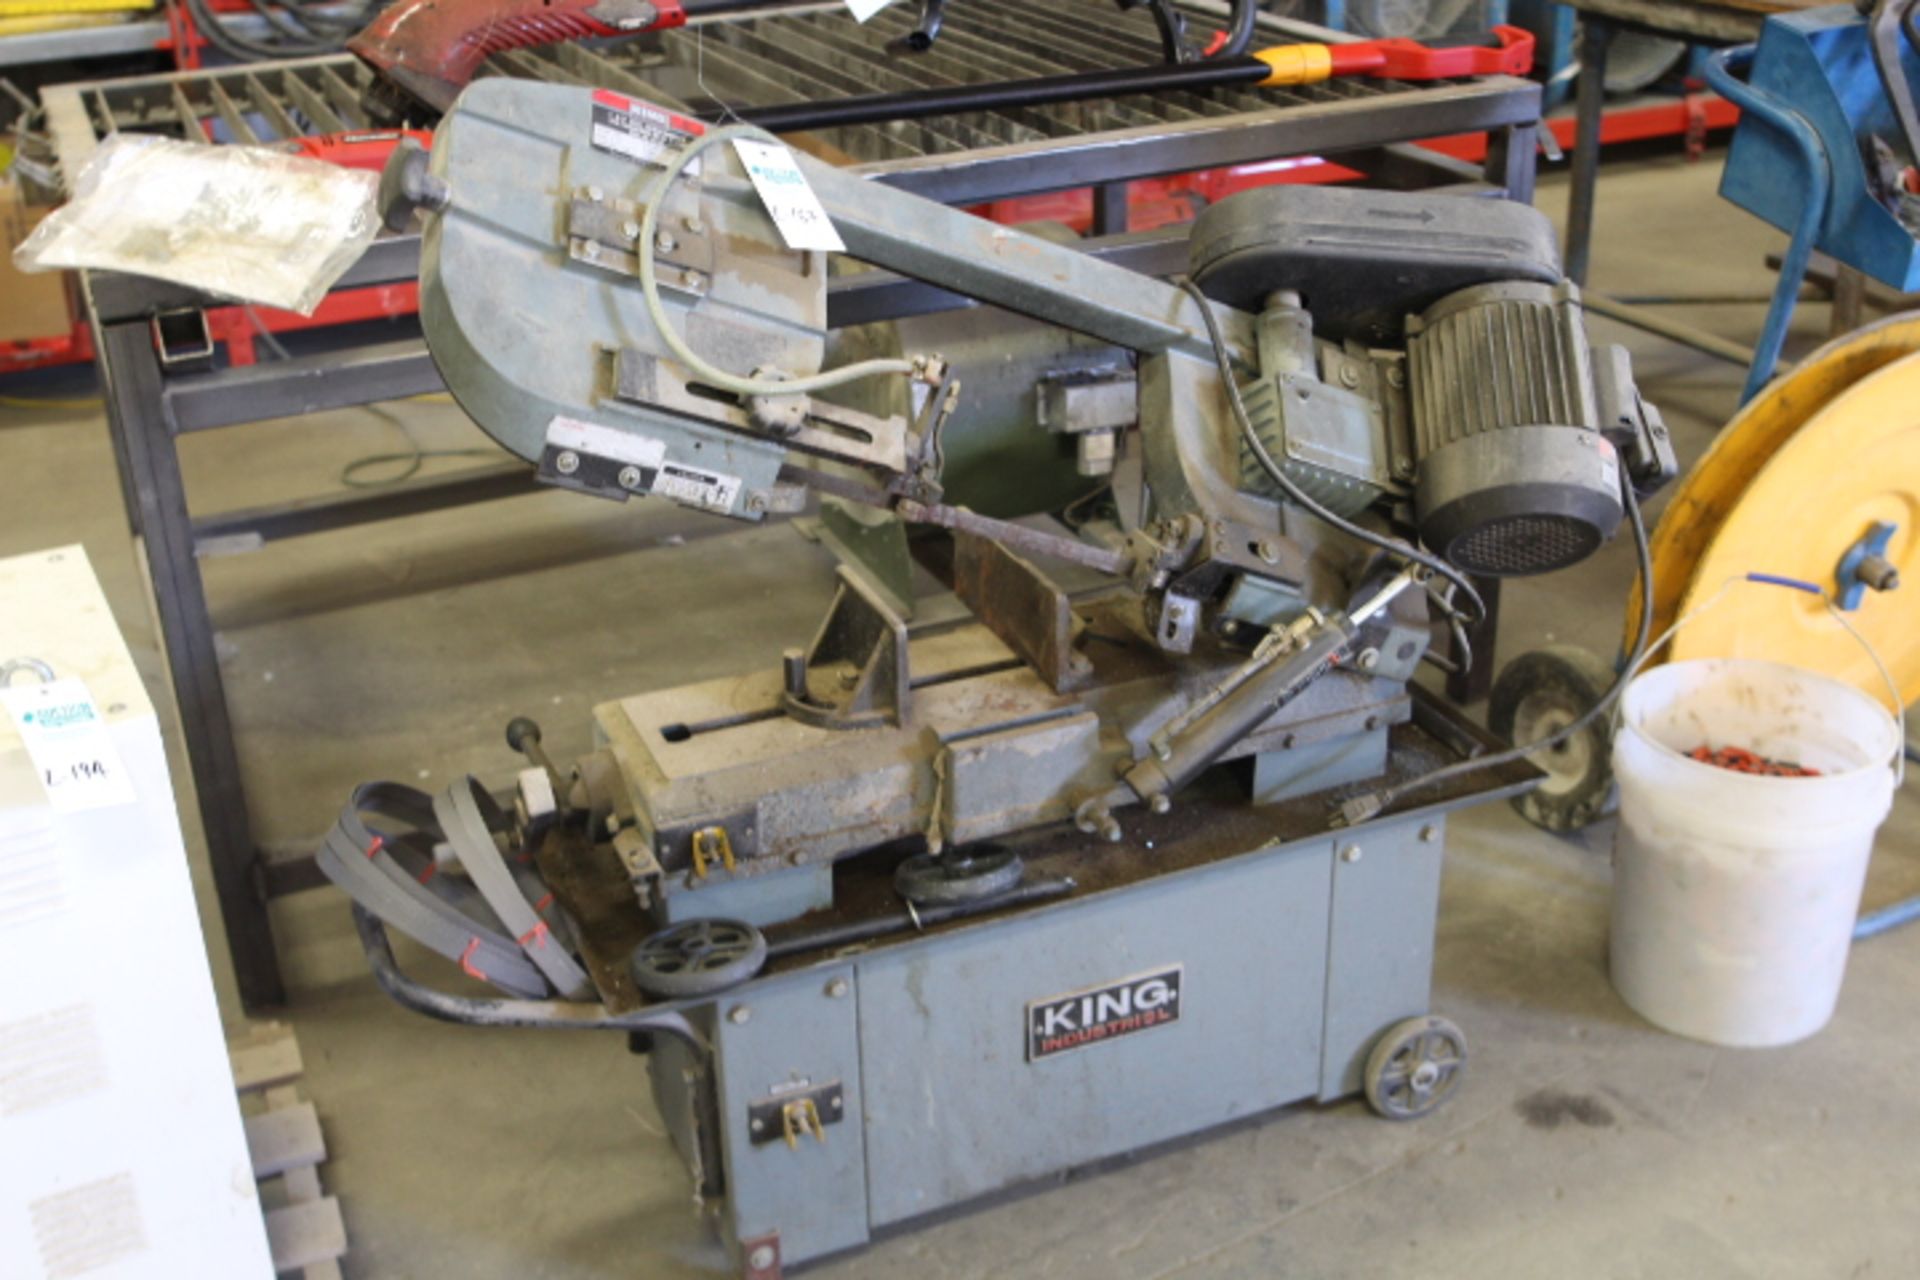 King Industrial Metal Cutting Band Saw 120 volt - Image 2 of 4